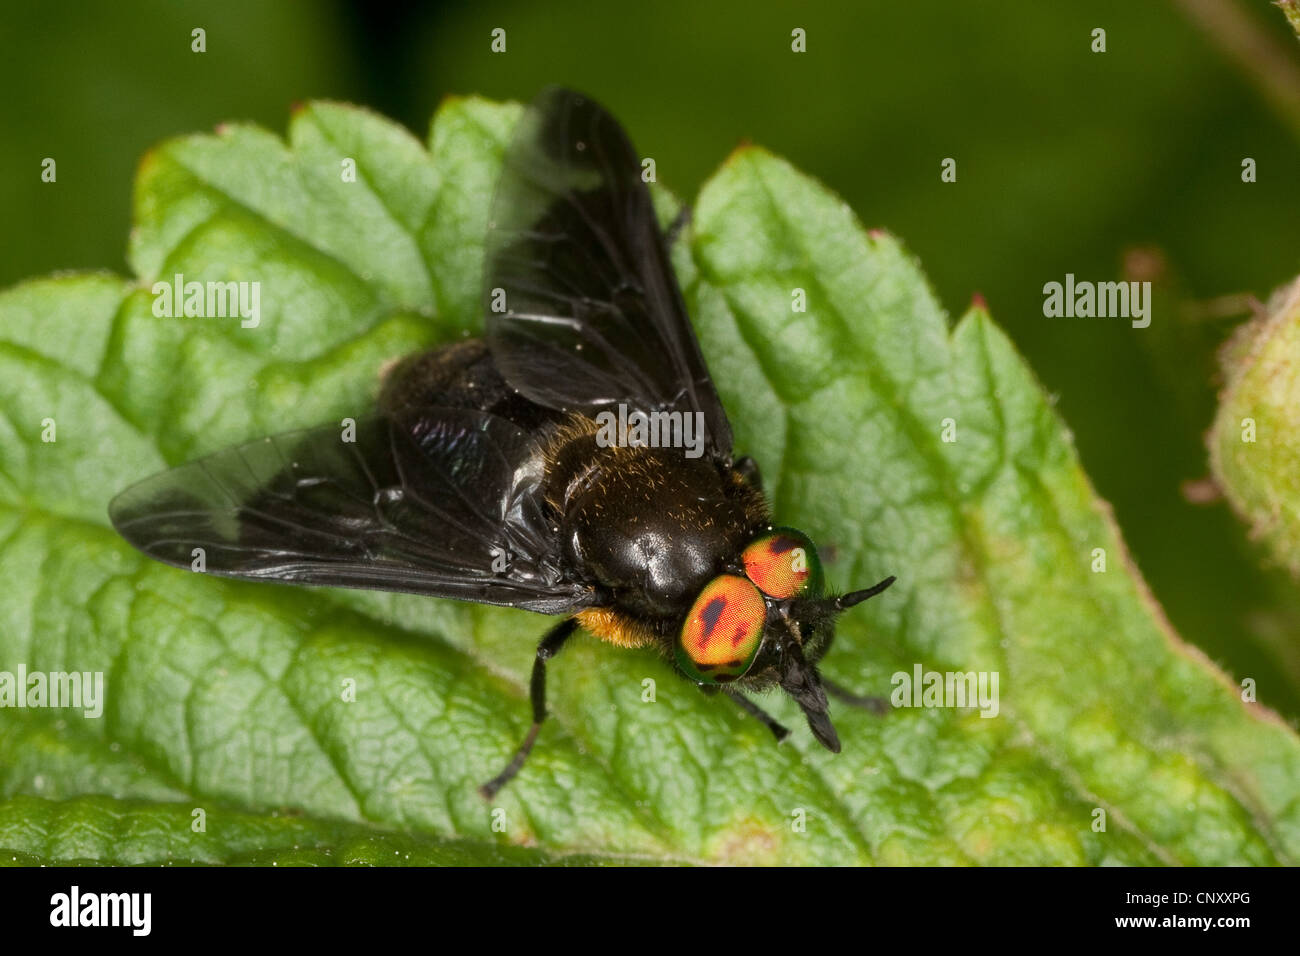 Blinding Breeze fly, Splayed Deerfly (Chrysops caecutiens), male, Germany Stock Photo